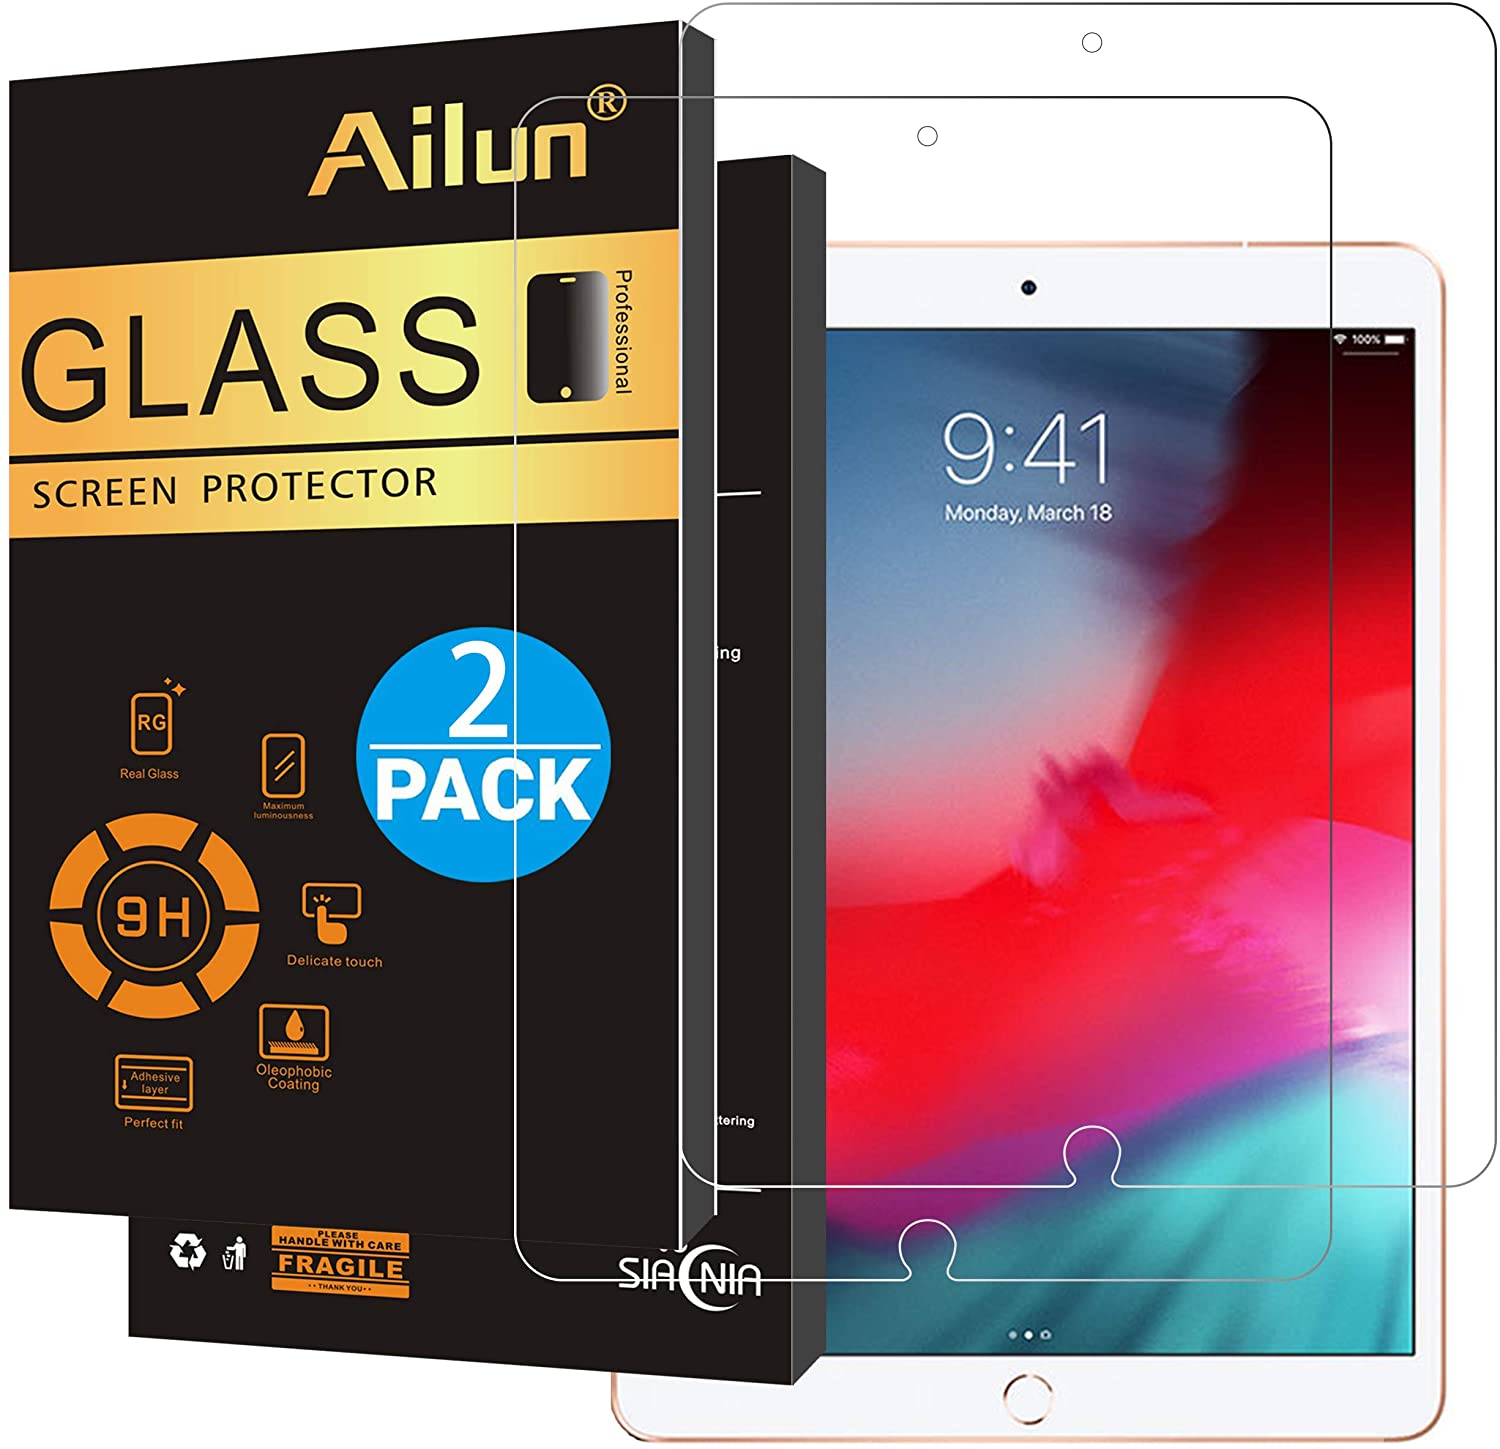 Ailun 2pack Screen Protector